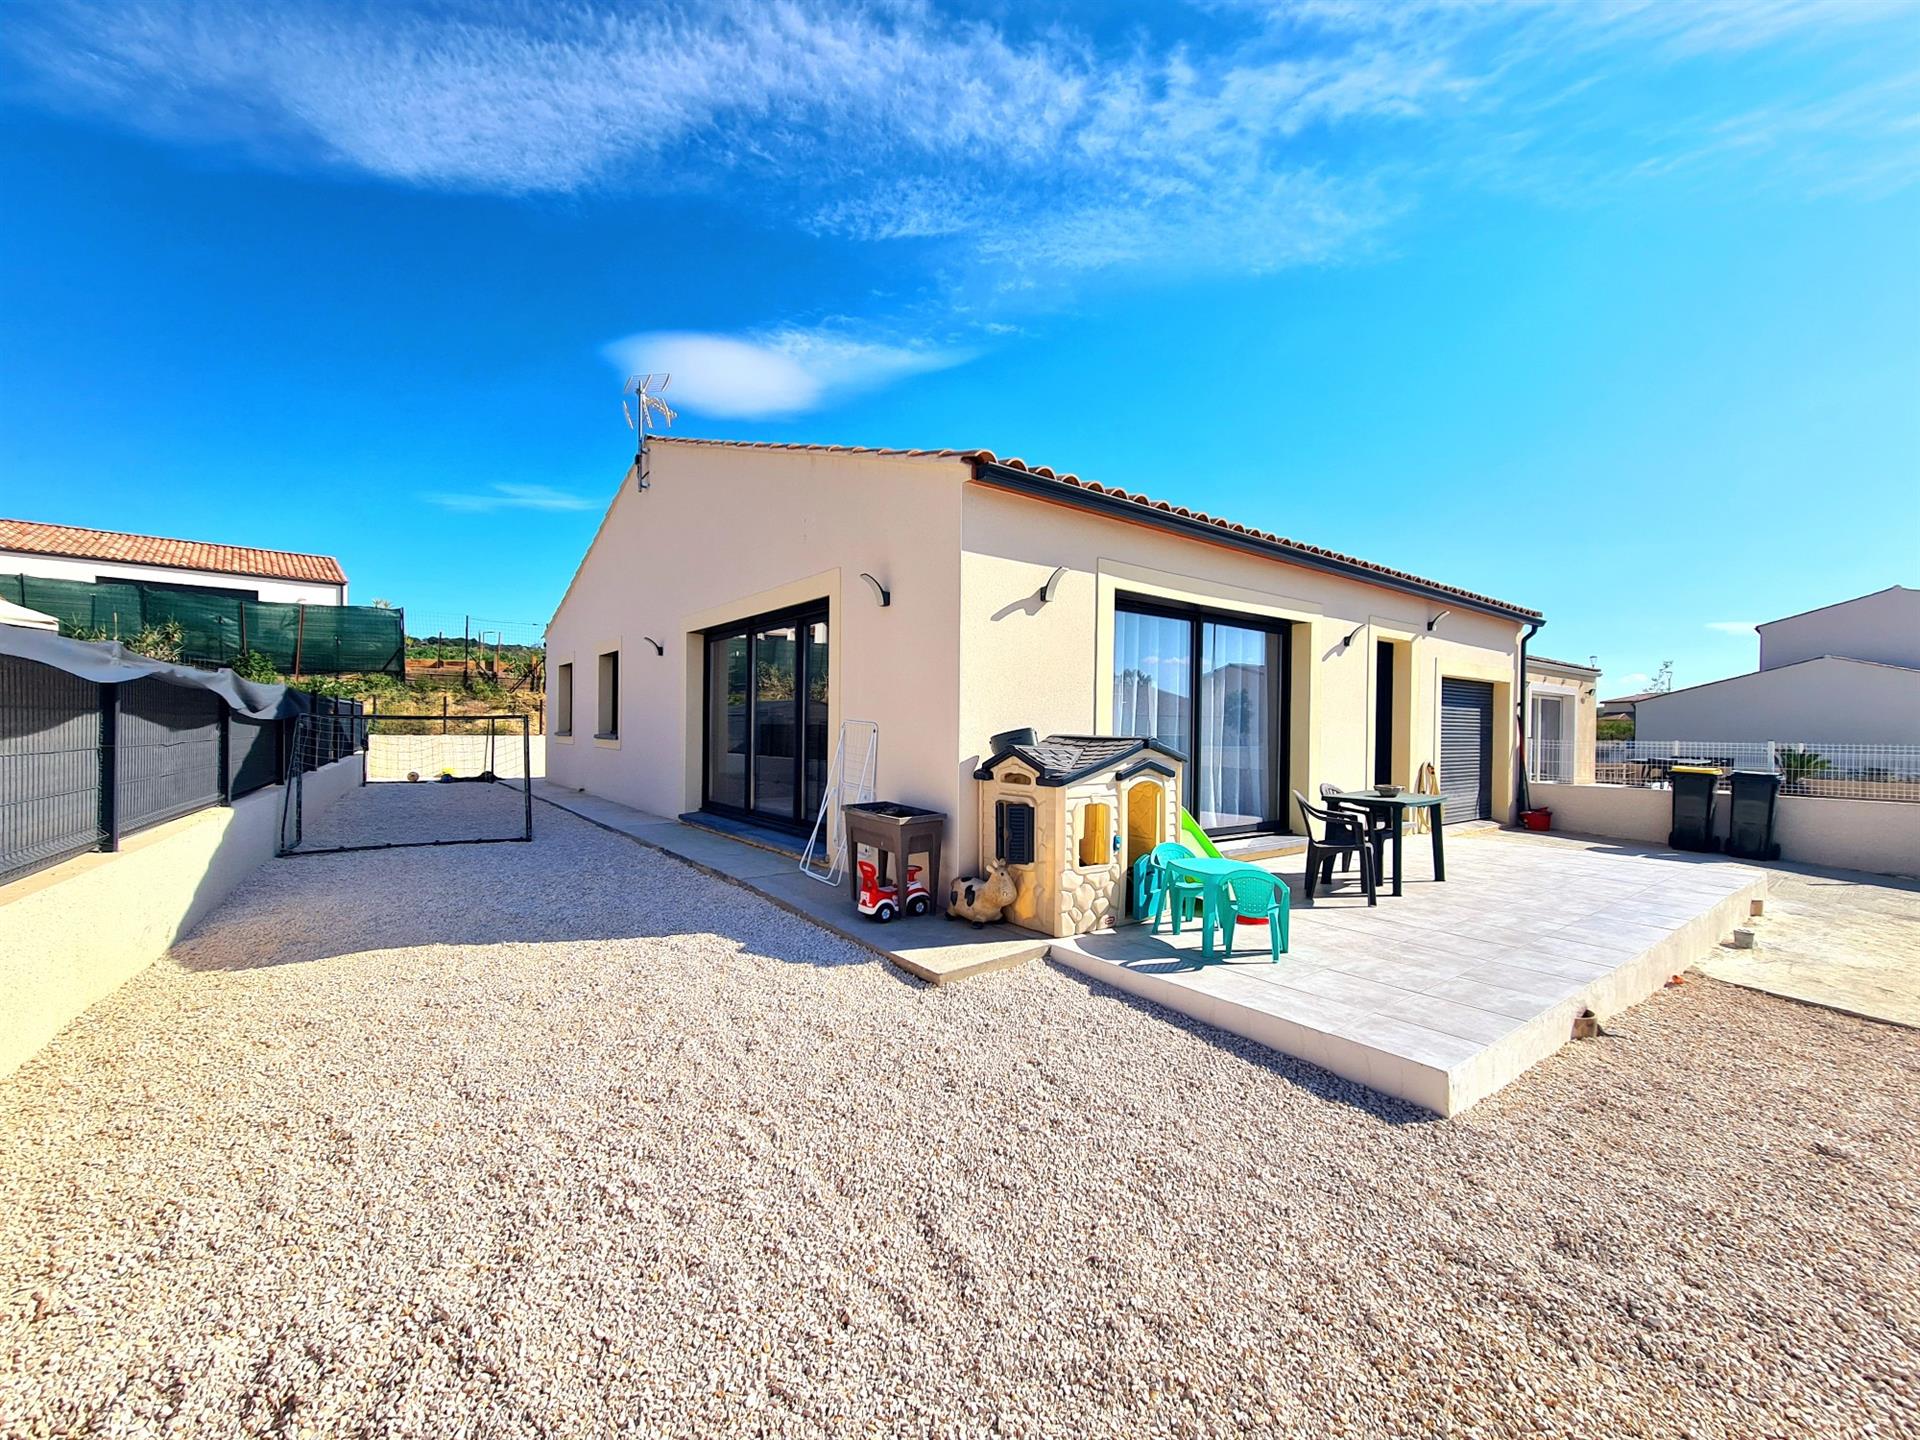 New build single storey villa with 115 m² of living space, 3 bedrooms on a 402 m² plot, on the edge 